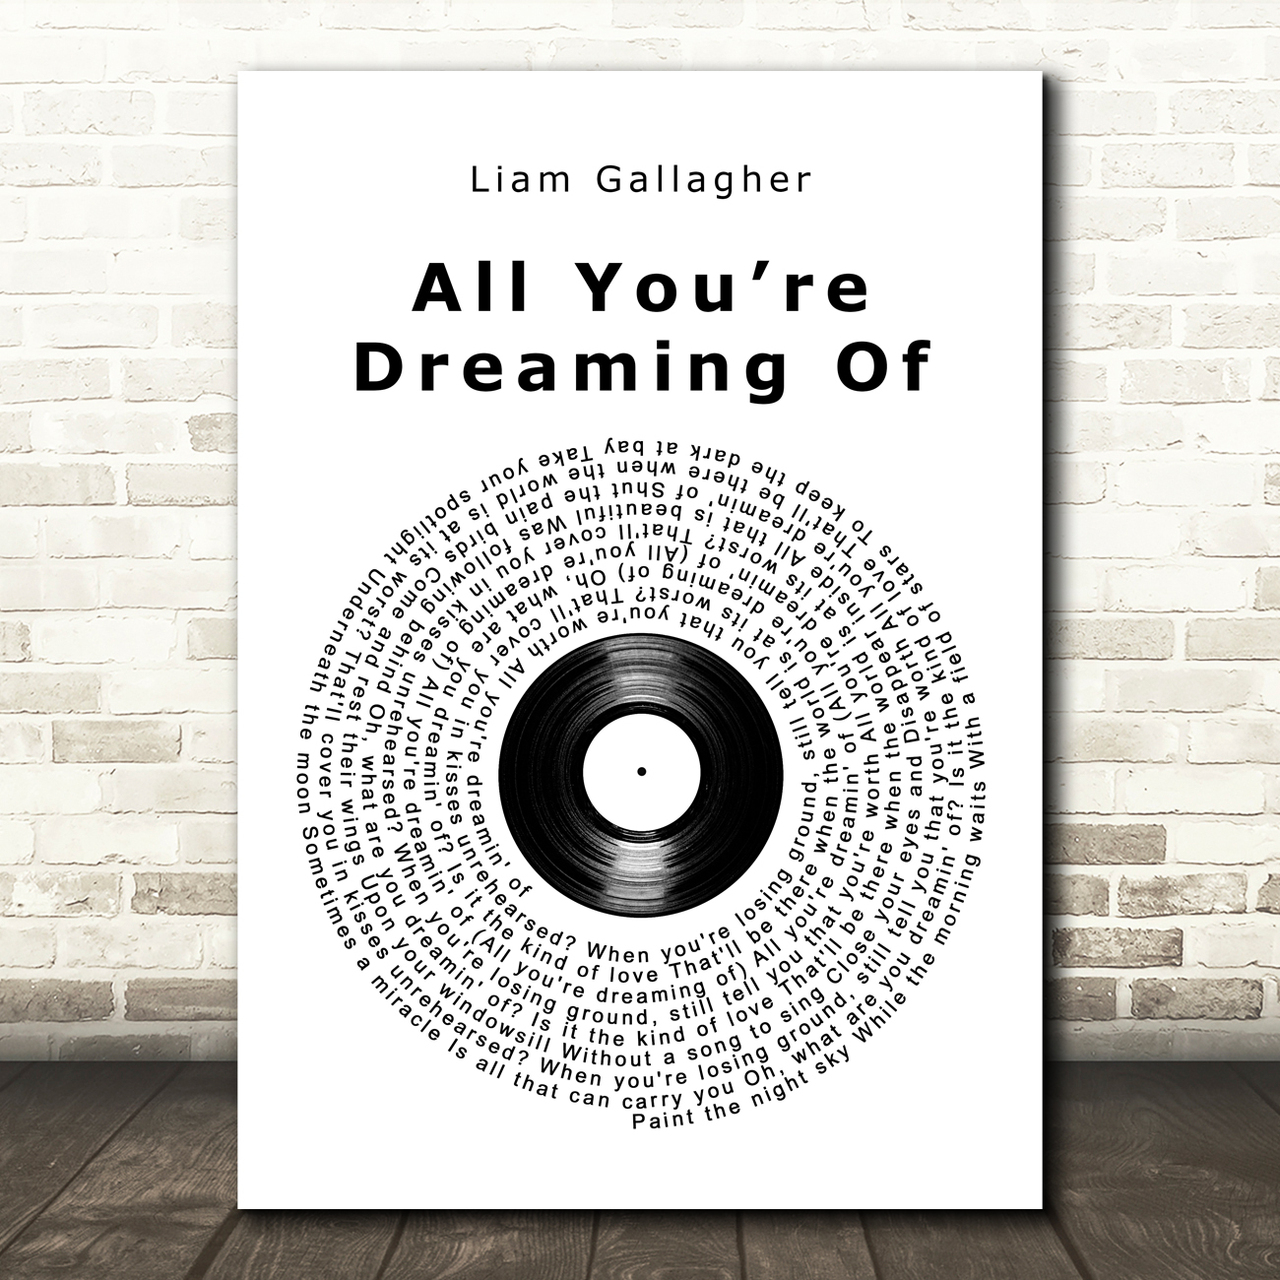 Liam Gallagher All Youre Dreaming Of Vinyl Record Song Lyric Art Print